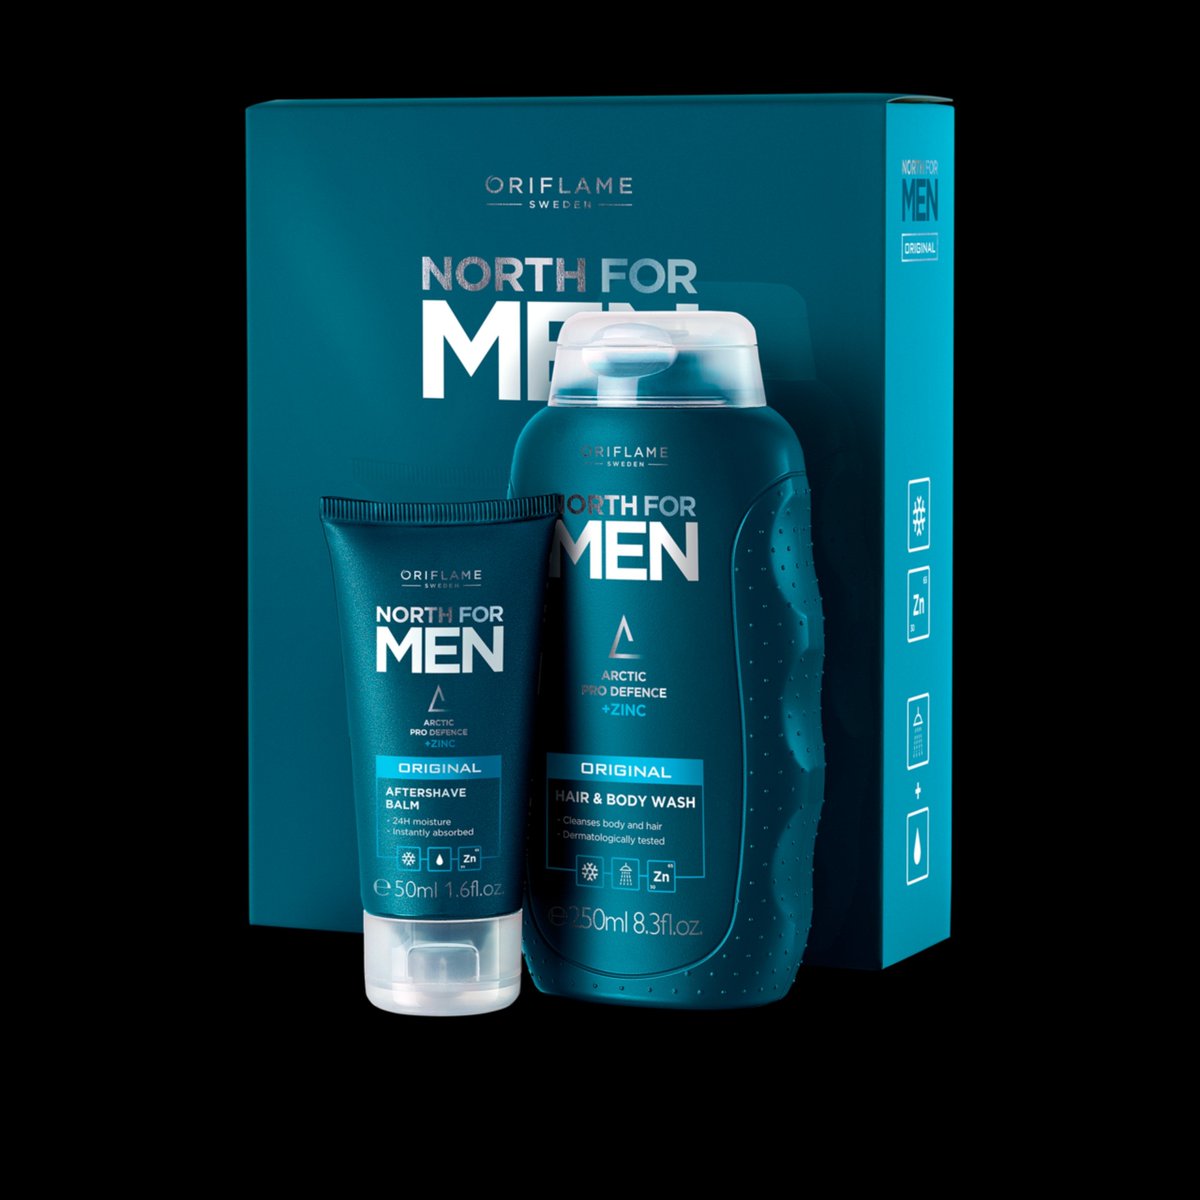 Mens skin care from #oriflame 
Are have a great range of sink care for men and ladies #skinbeauty4u